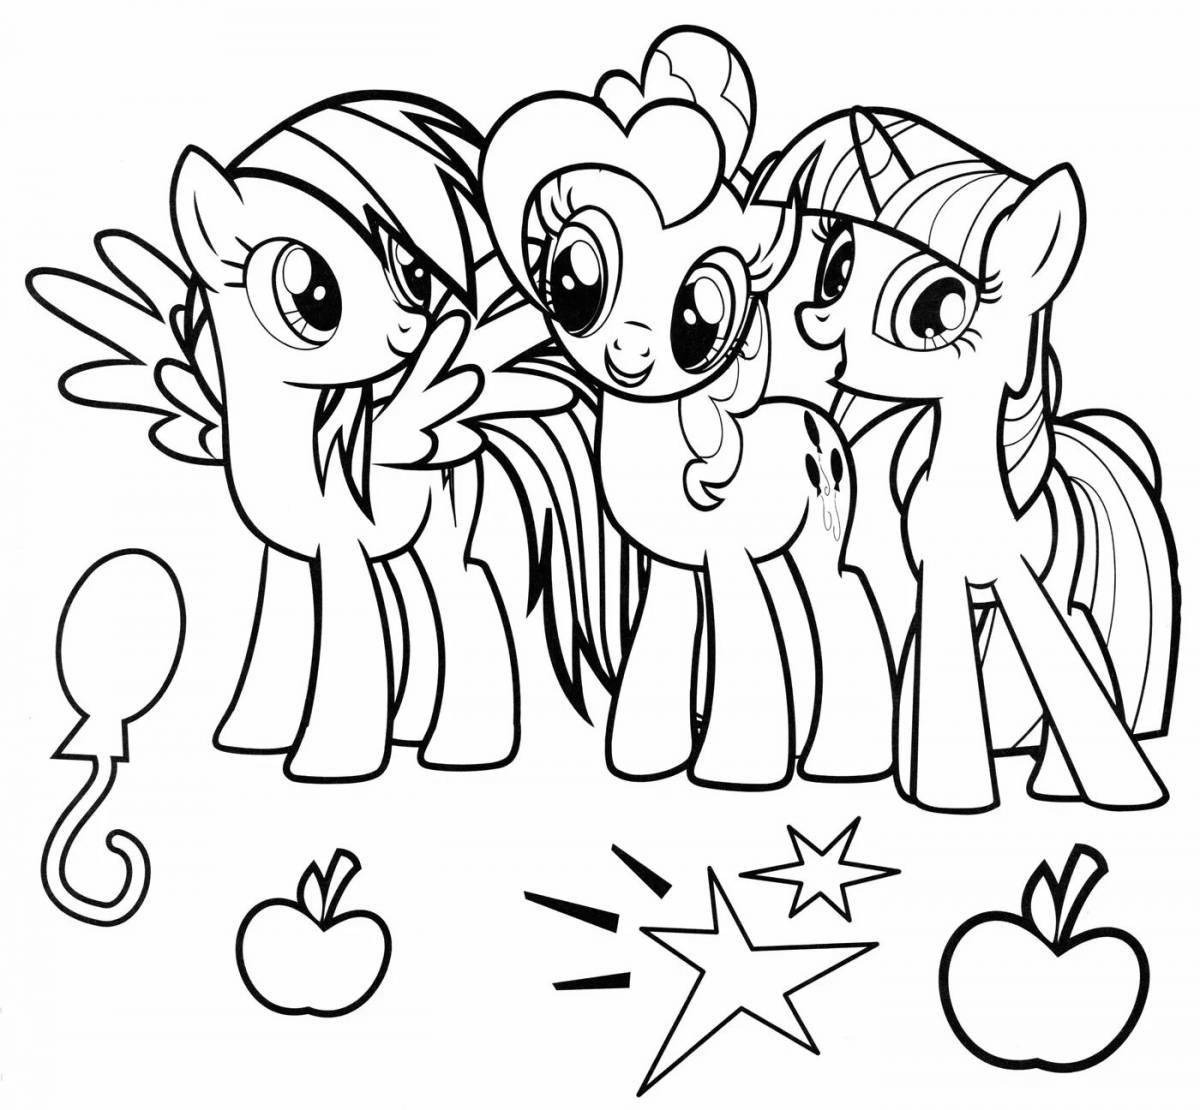 May little pony coloring page #1